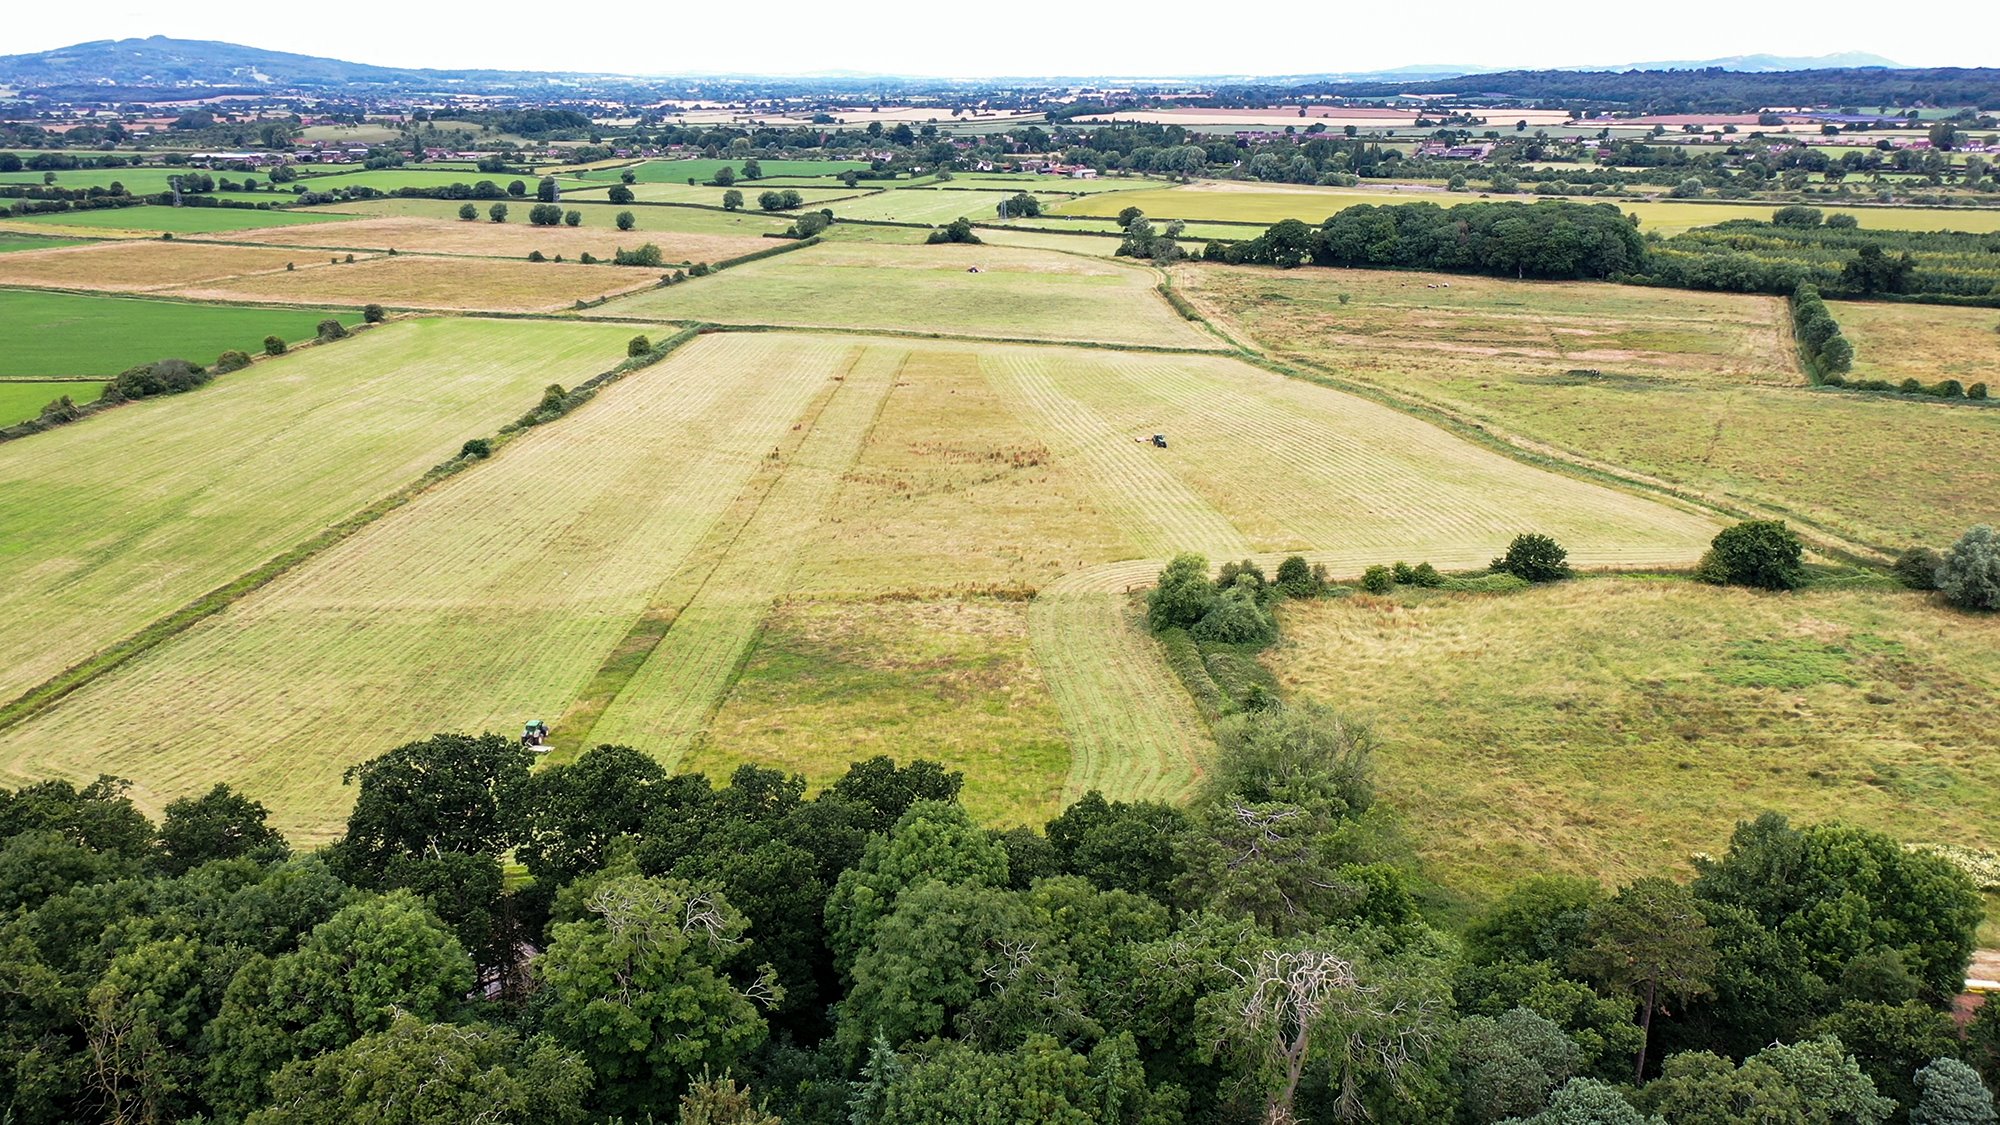 A field being mowed in preparation of creating a new wetland habitat for birds and wildlife